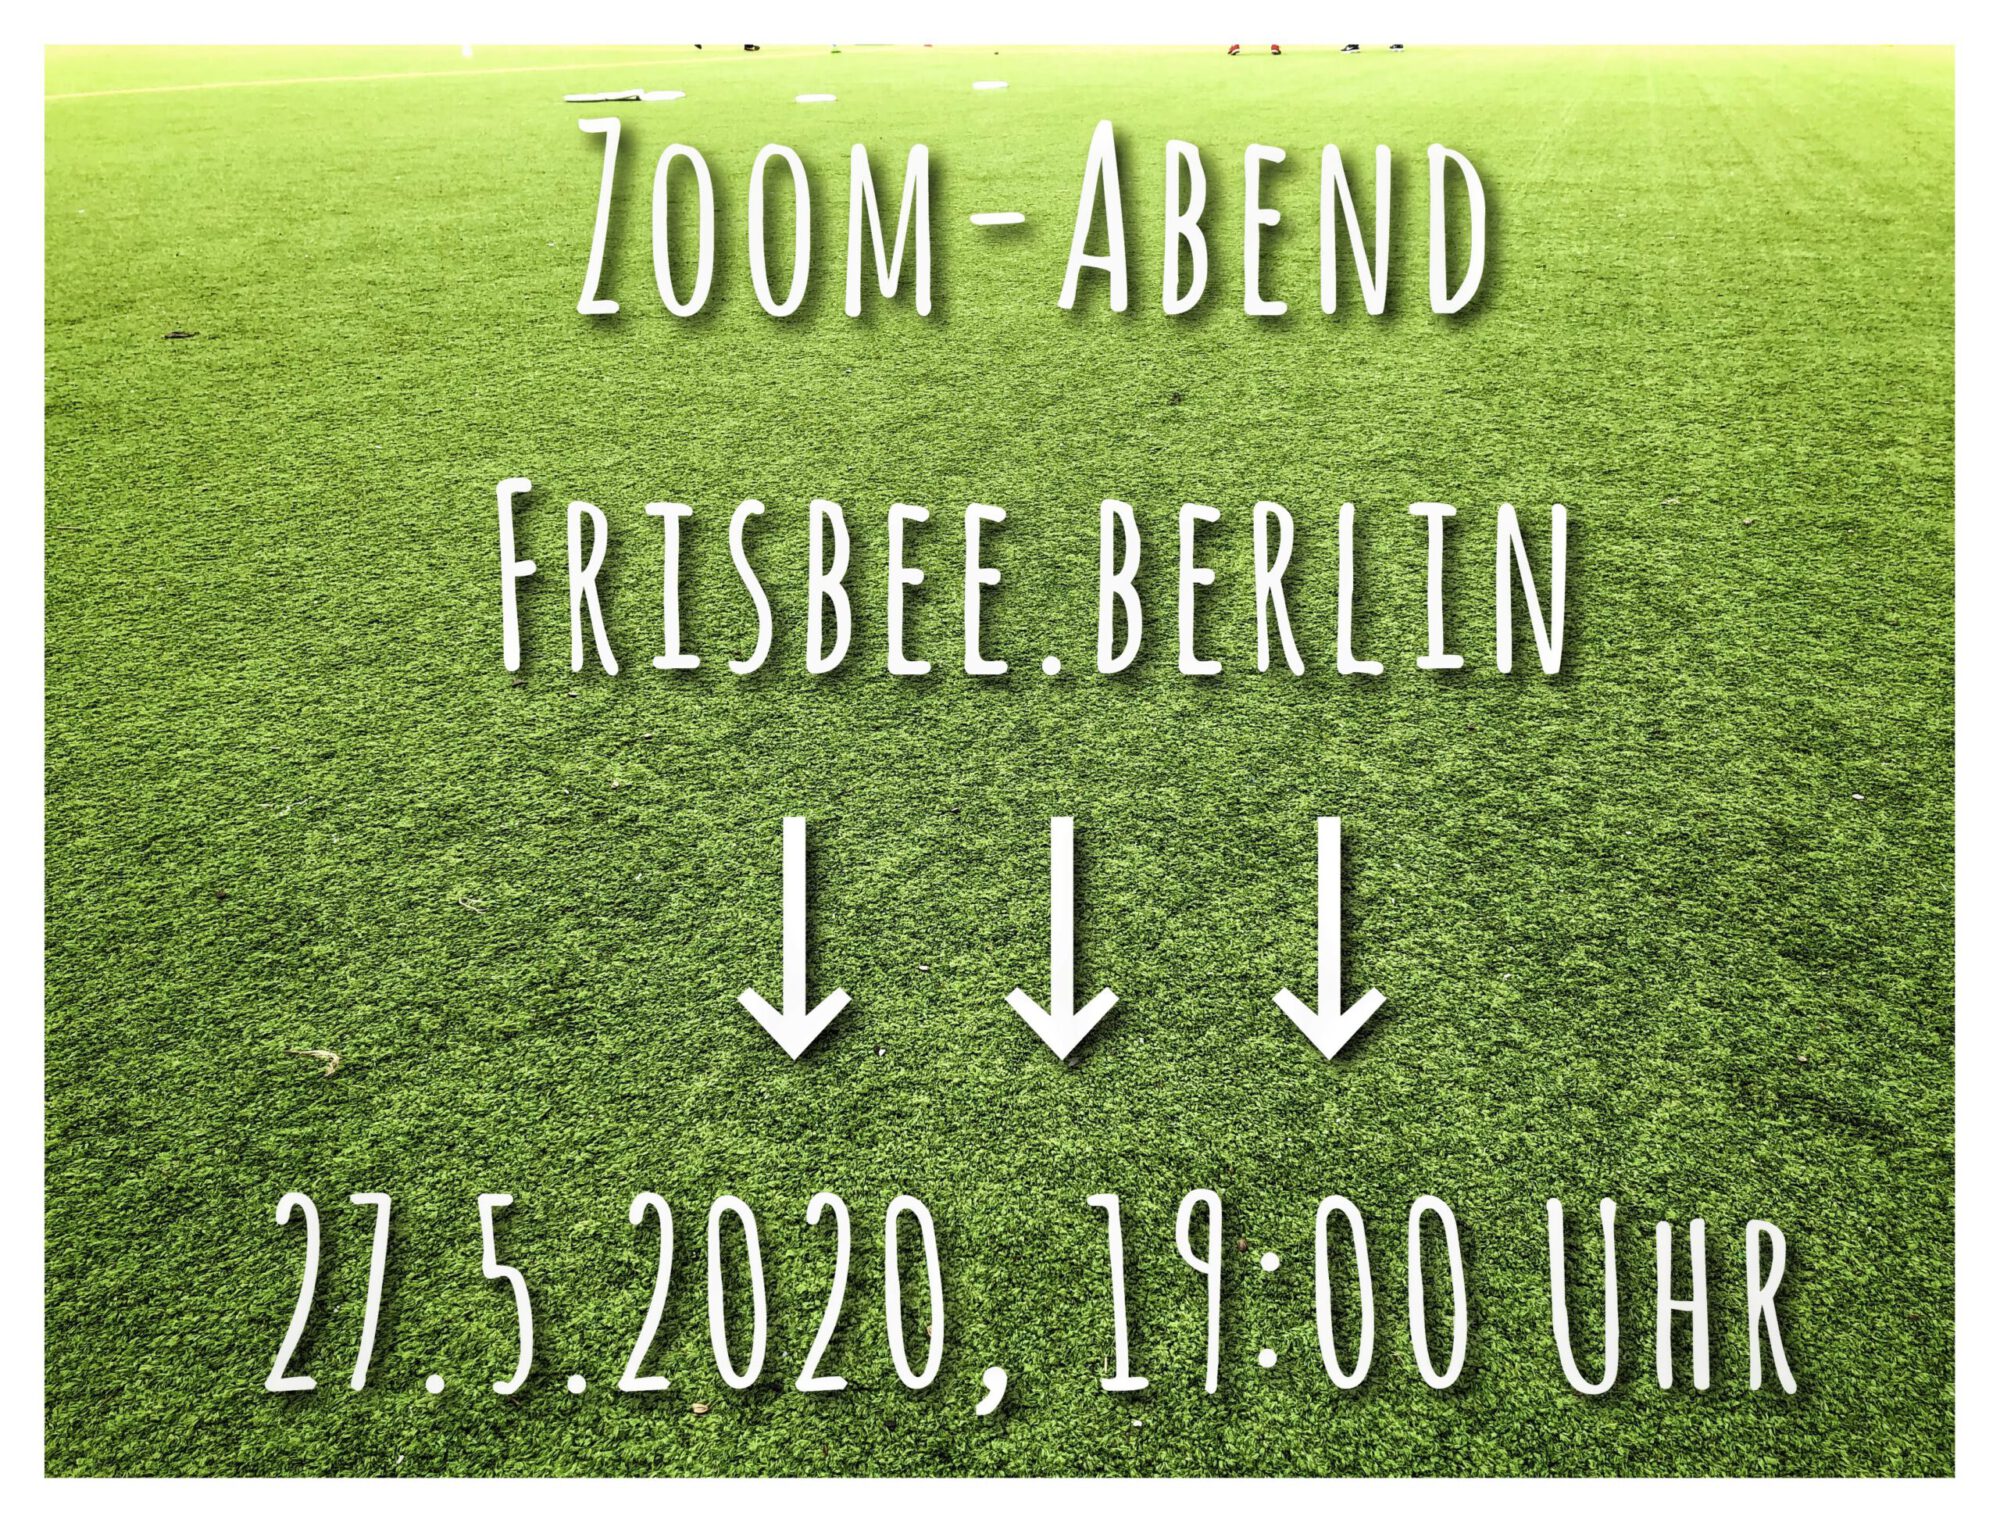 You are currently viewing Einladung zum Zoom-Abend “frisbee.berlin” am 27. Mai